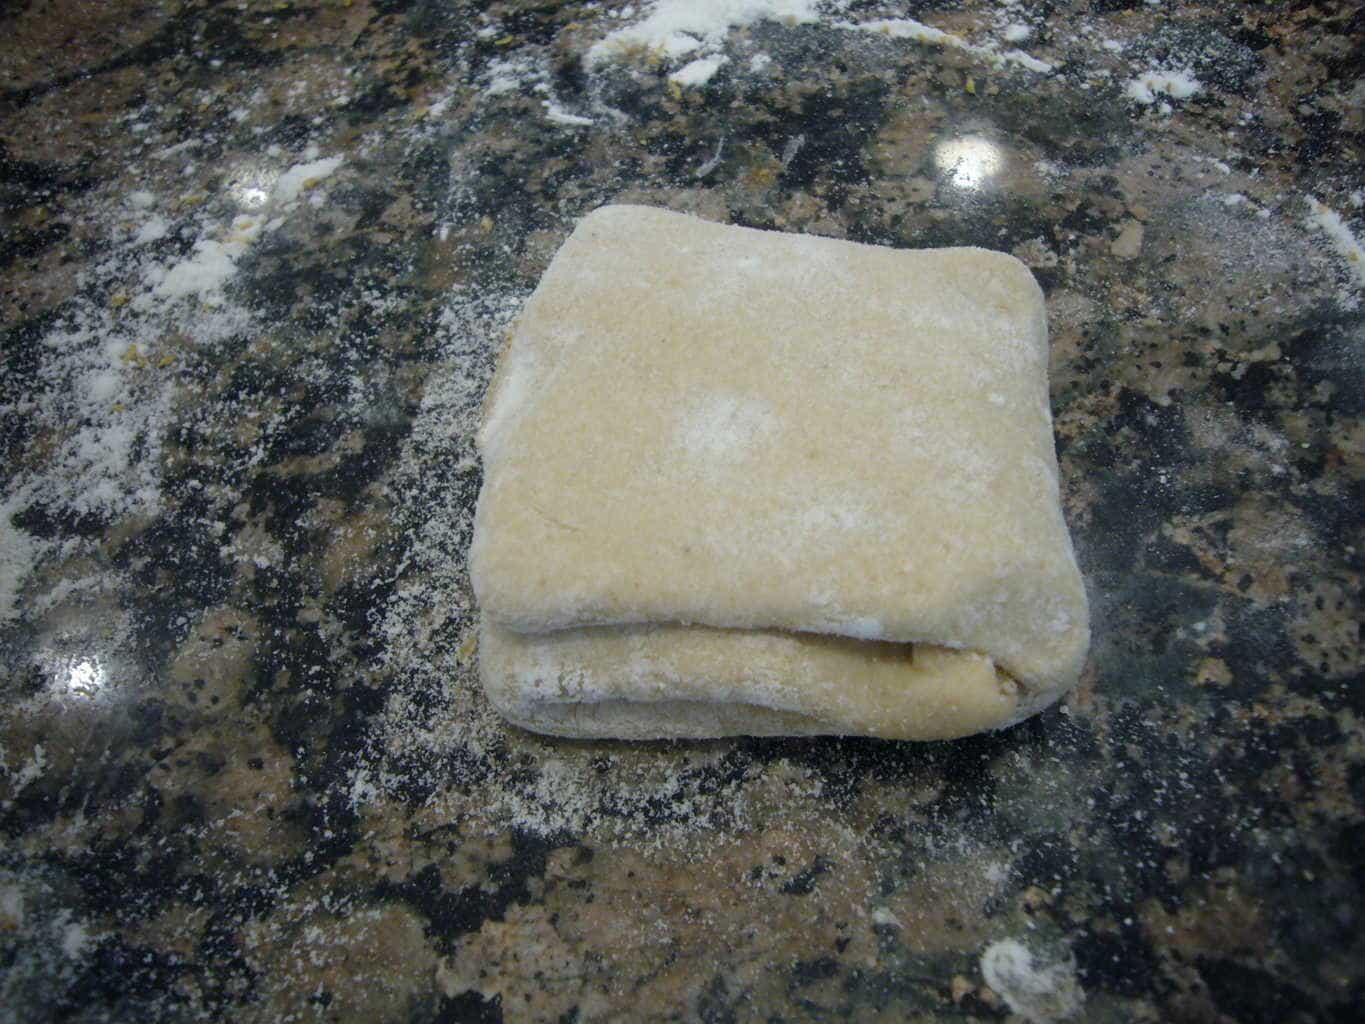 Fold over from the other side to make a square shaped layered dough portion for the egg paratha.